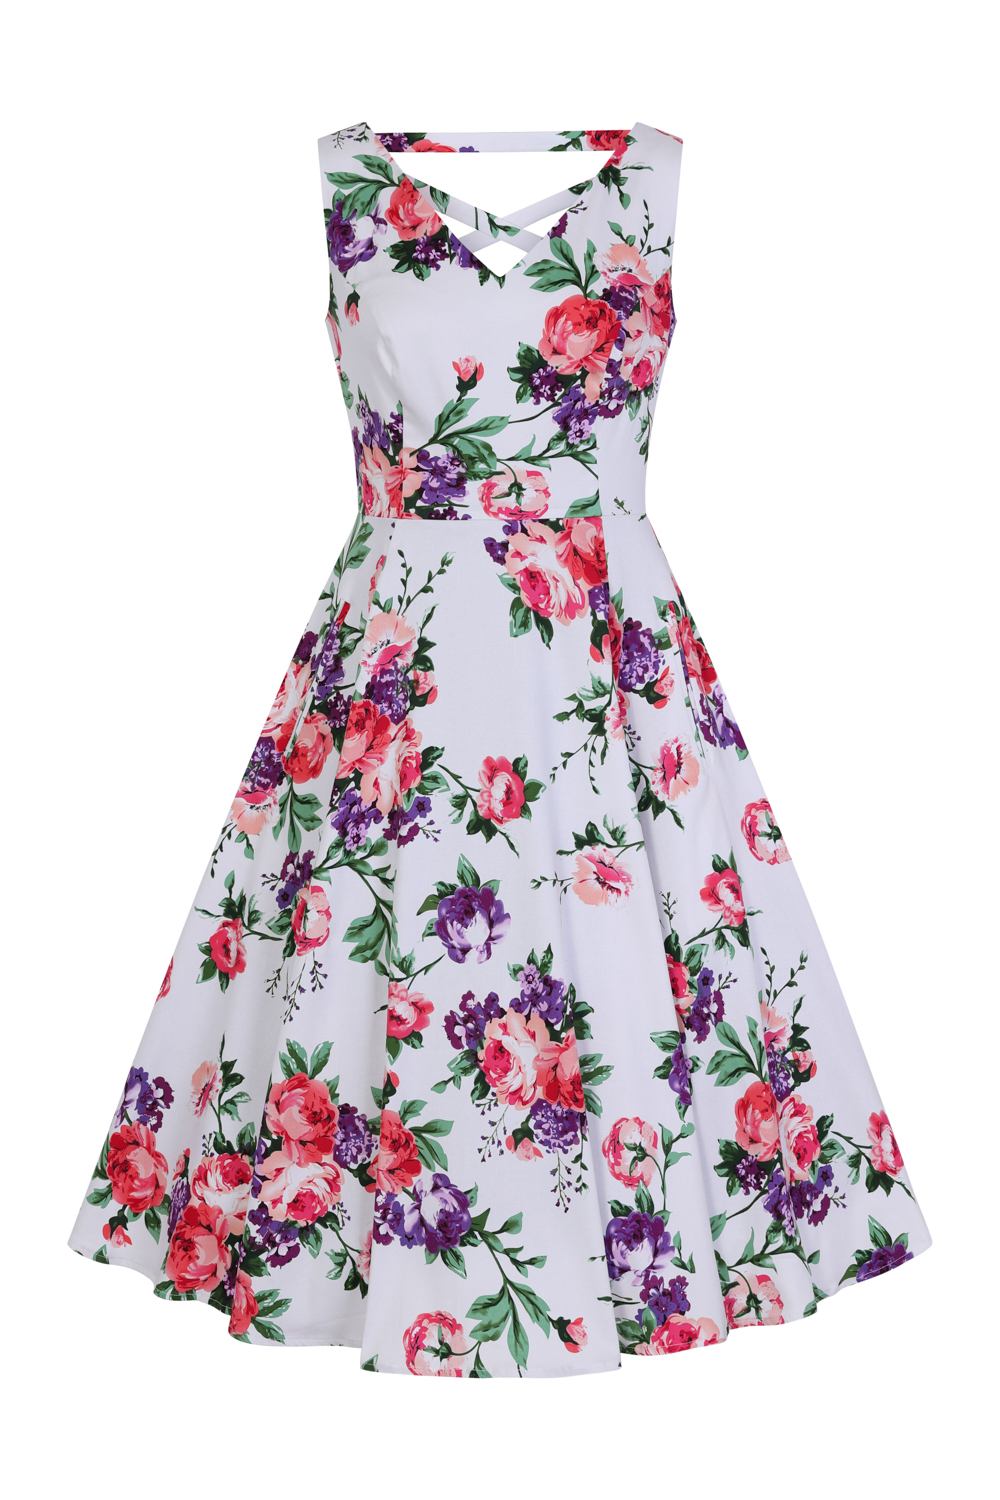 Molly Rose Swing Dress in white - Hearts & Roses London